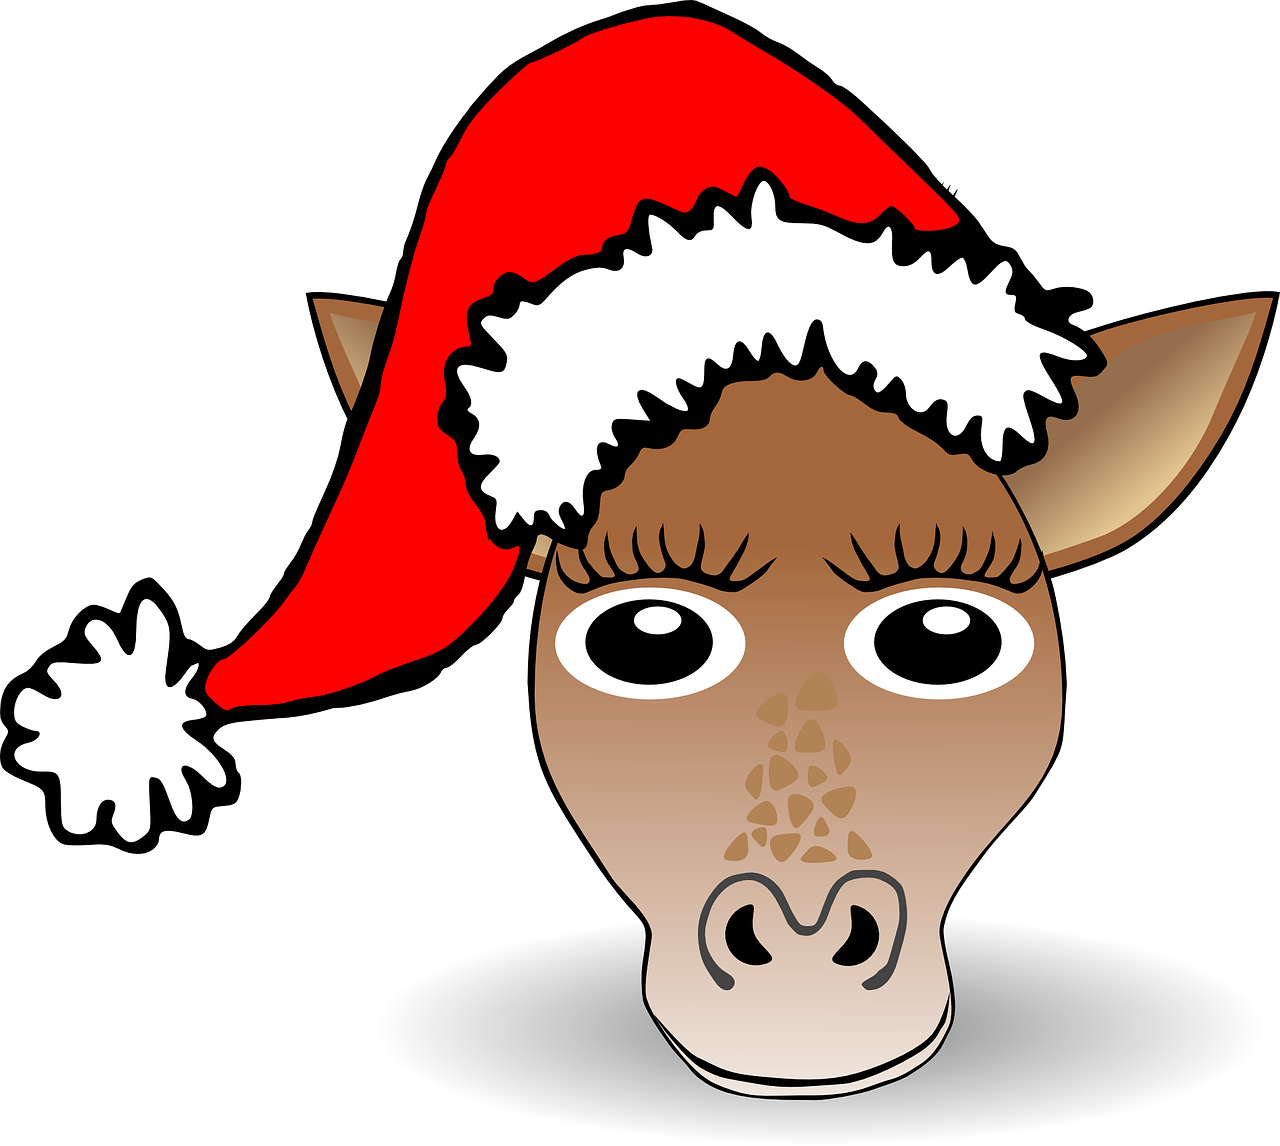 horse,mule,pony,animal,christmas,santa claus,hat,free vector graphics,free pictures, free photos, free images, royalty free, free illustrations, public domain